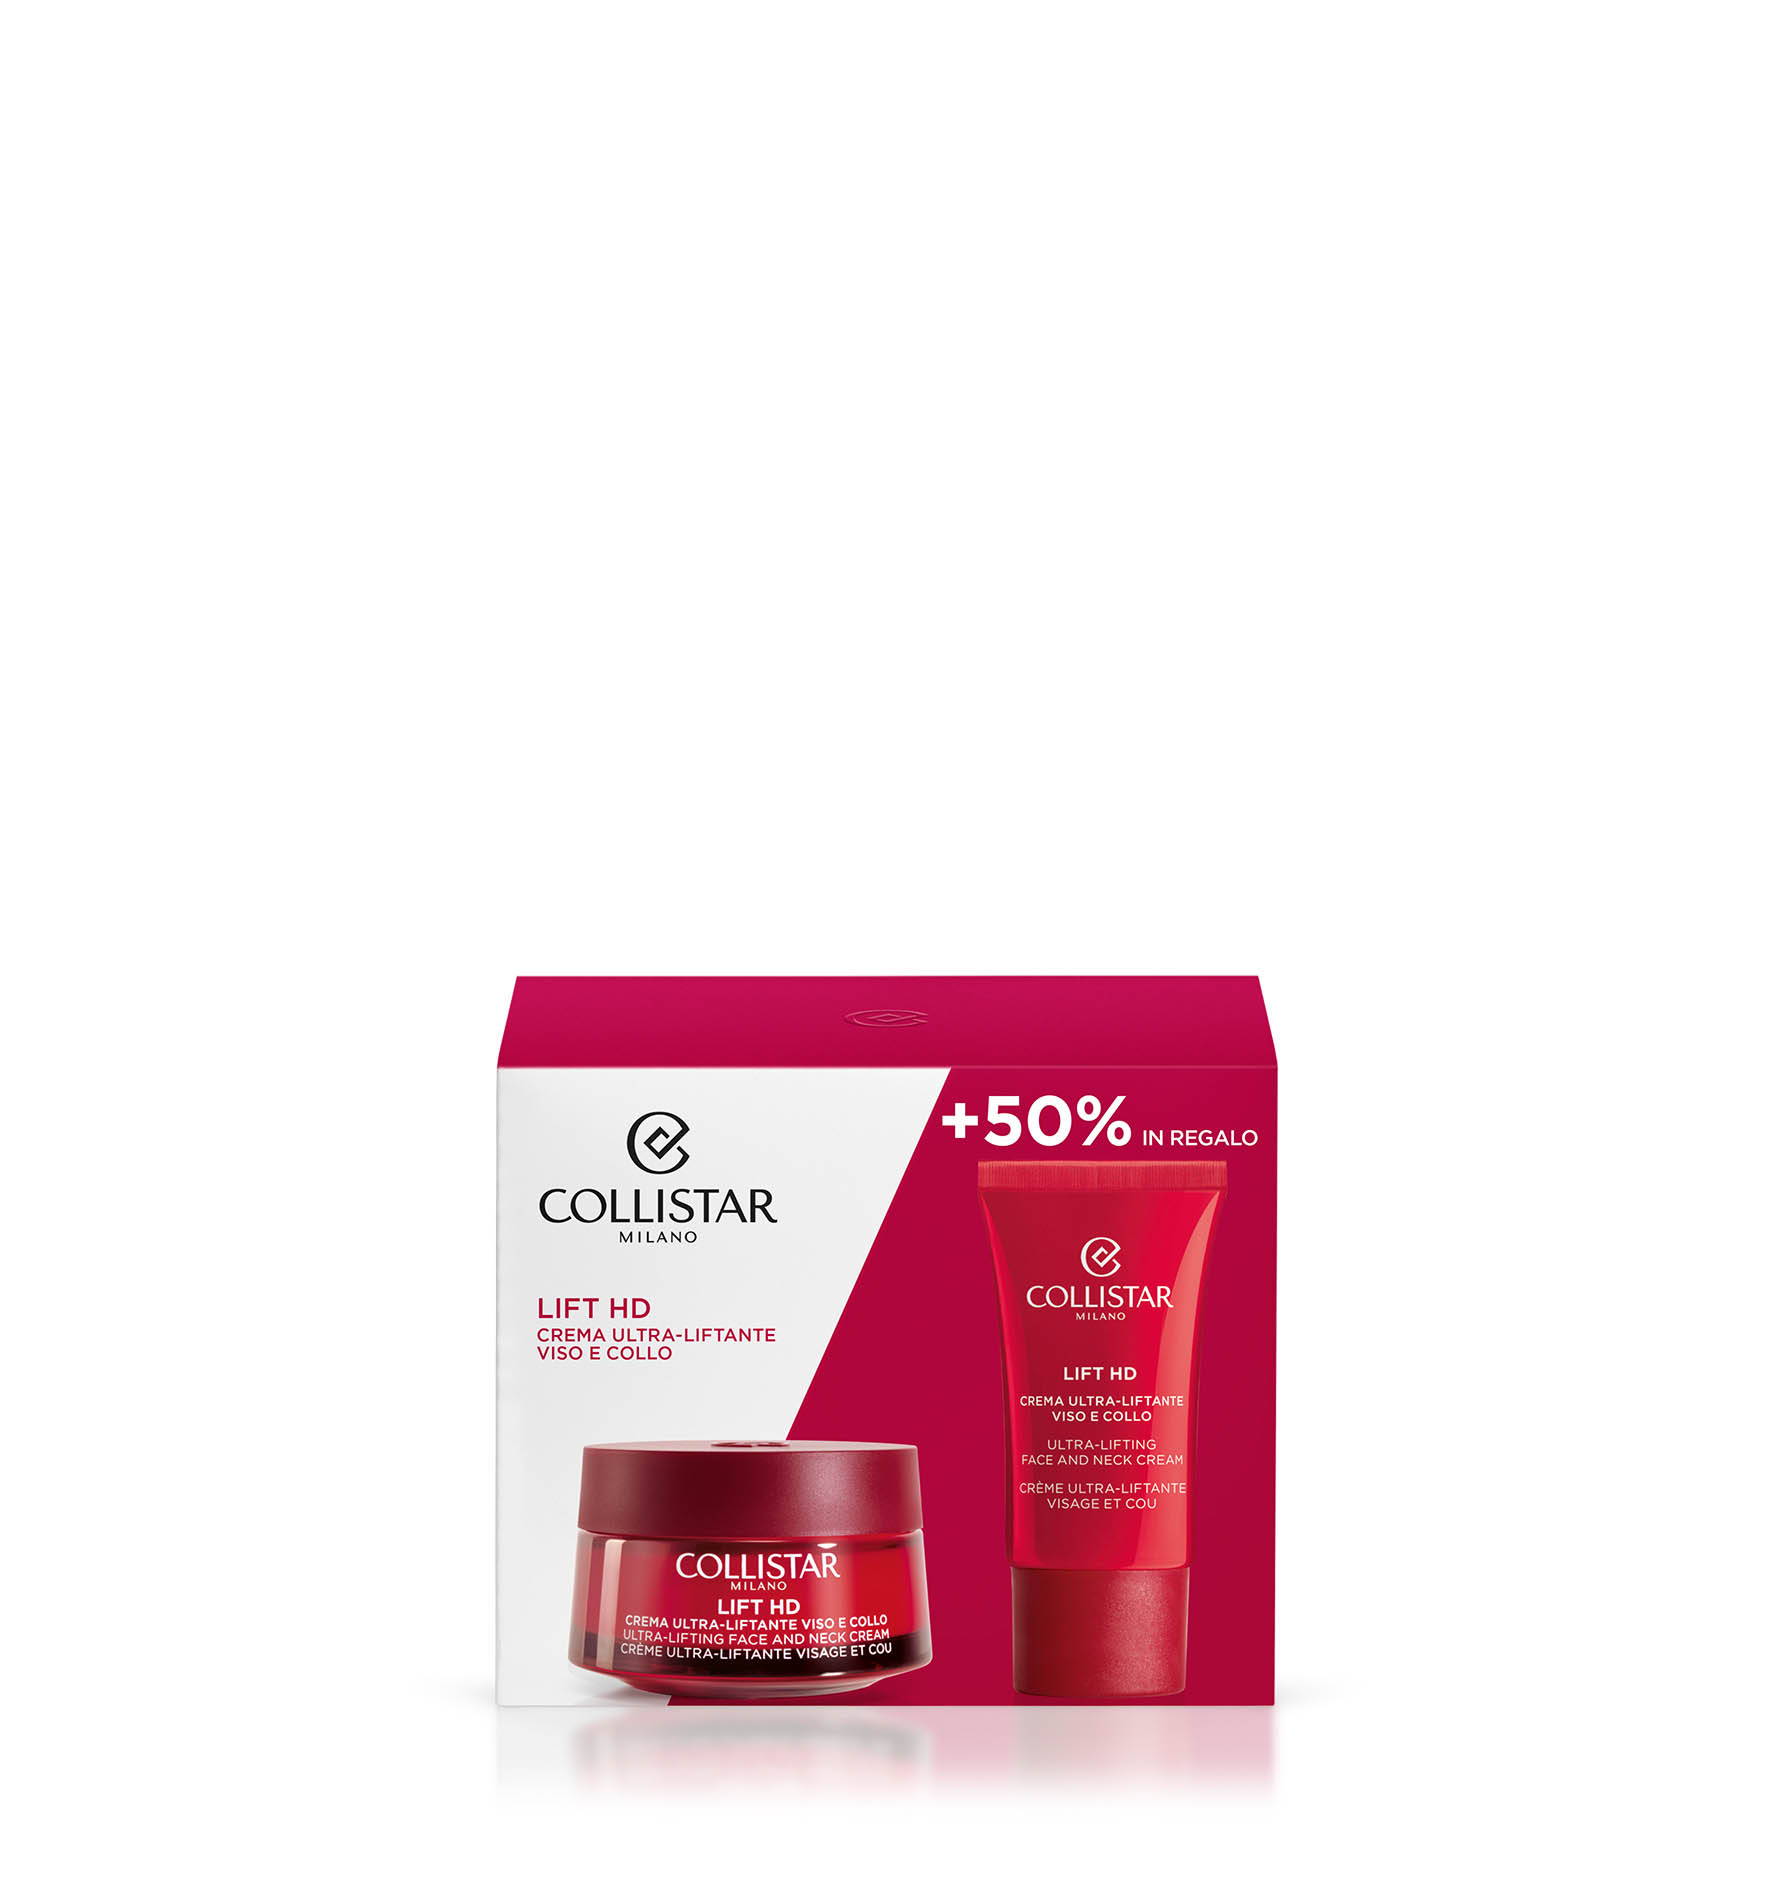 LIFT HD ULTRA-LIFTING FACE AND NECK CREAM 50 ml SET - Wrinkles | Collistar - Shop Online Ufficiale